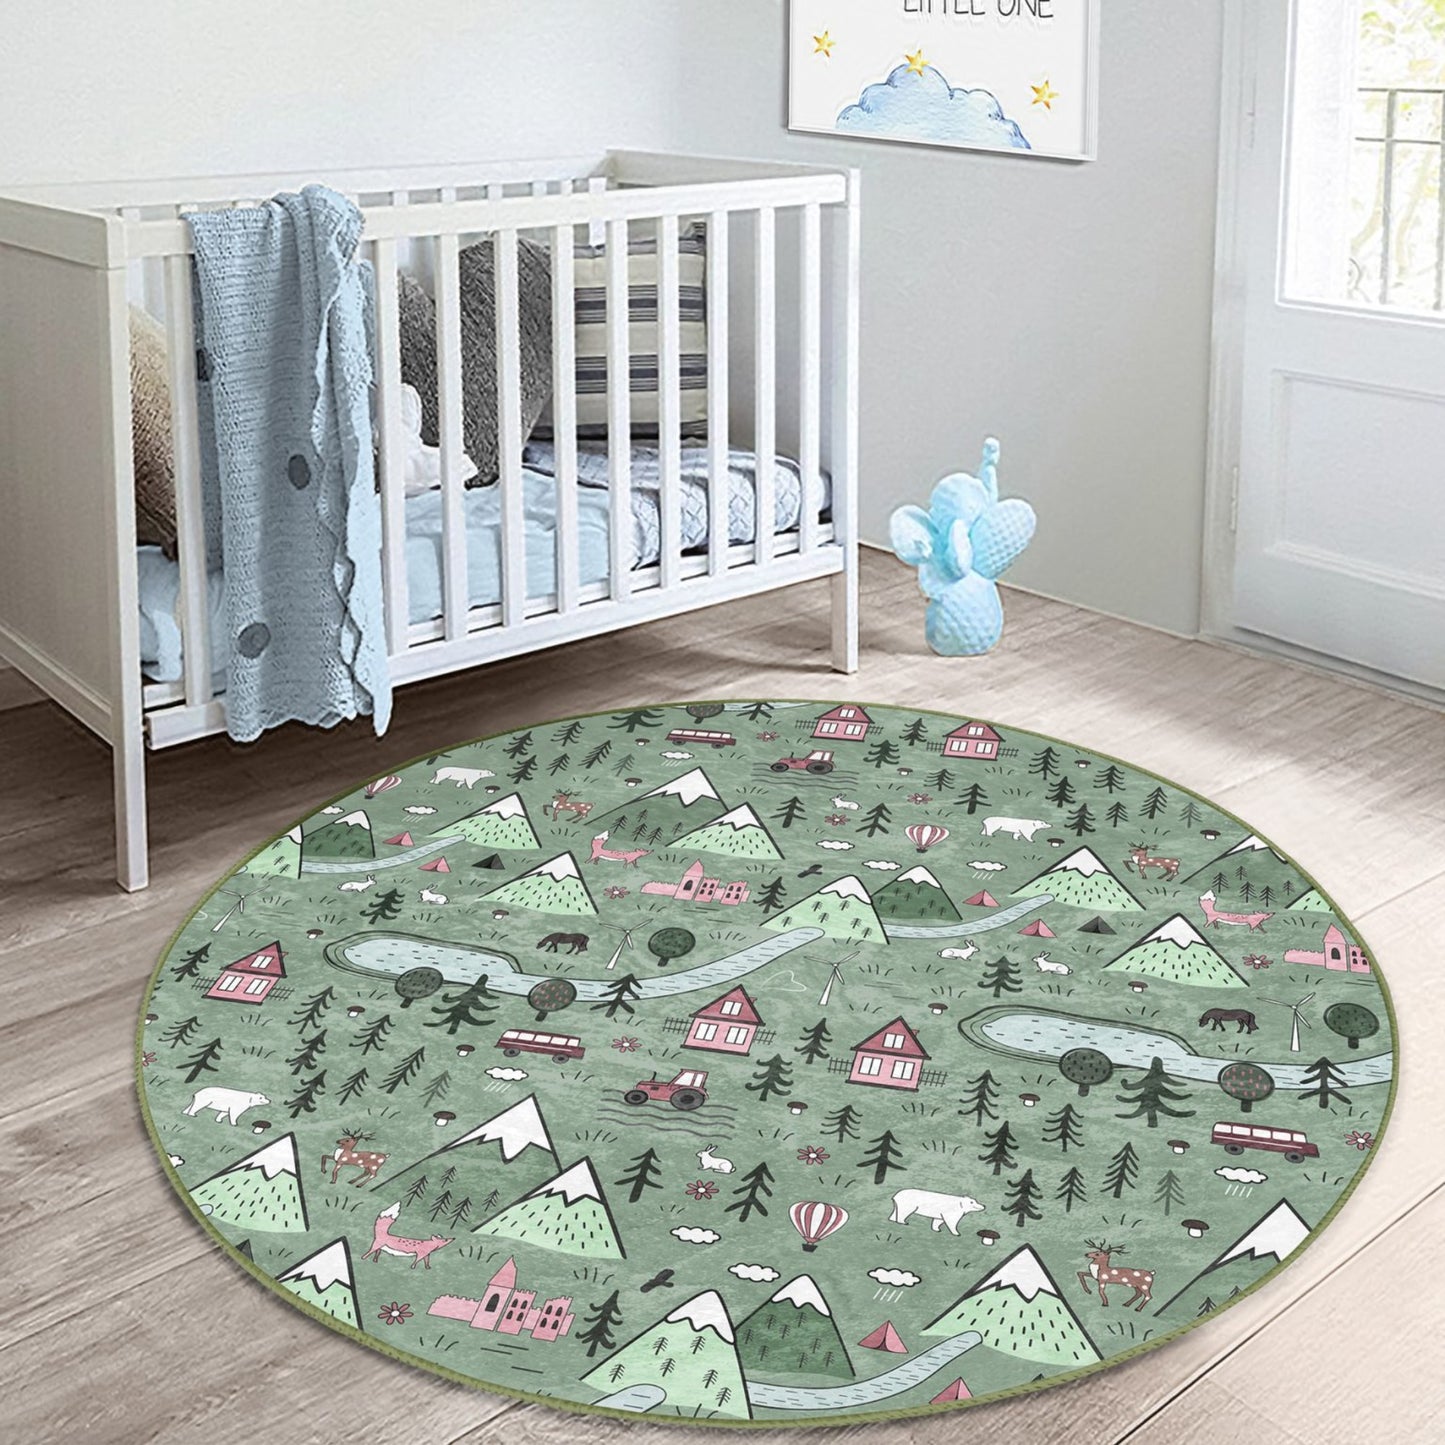 Rug with Scenic Mountain Village Illustration